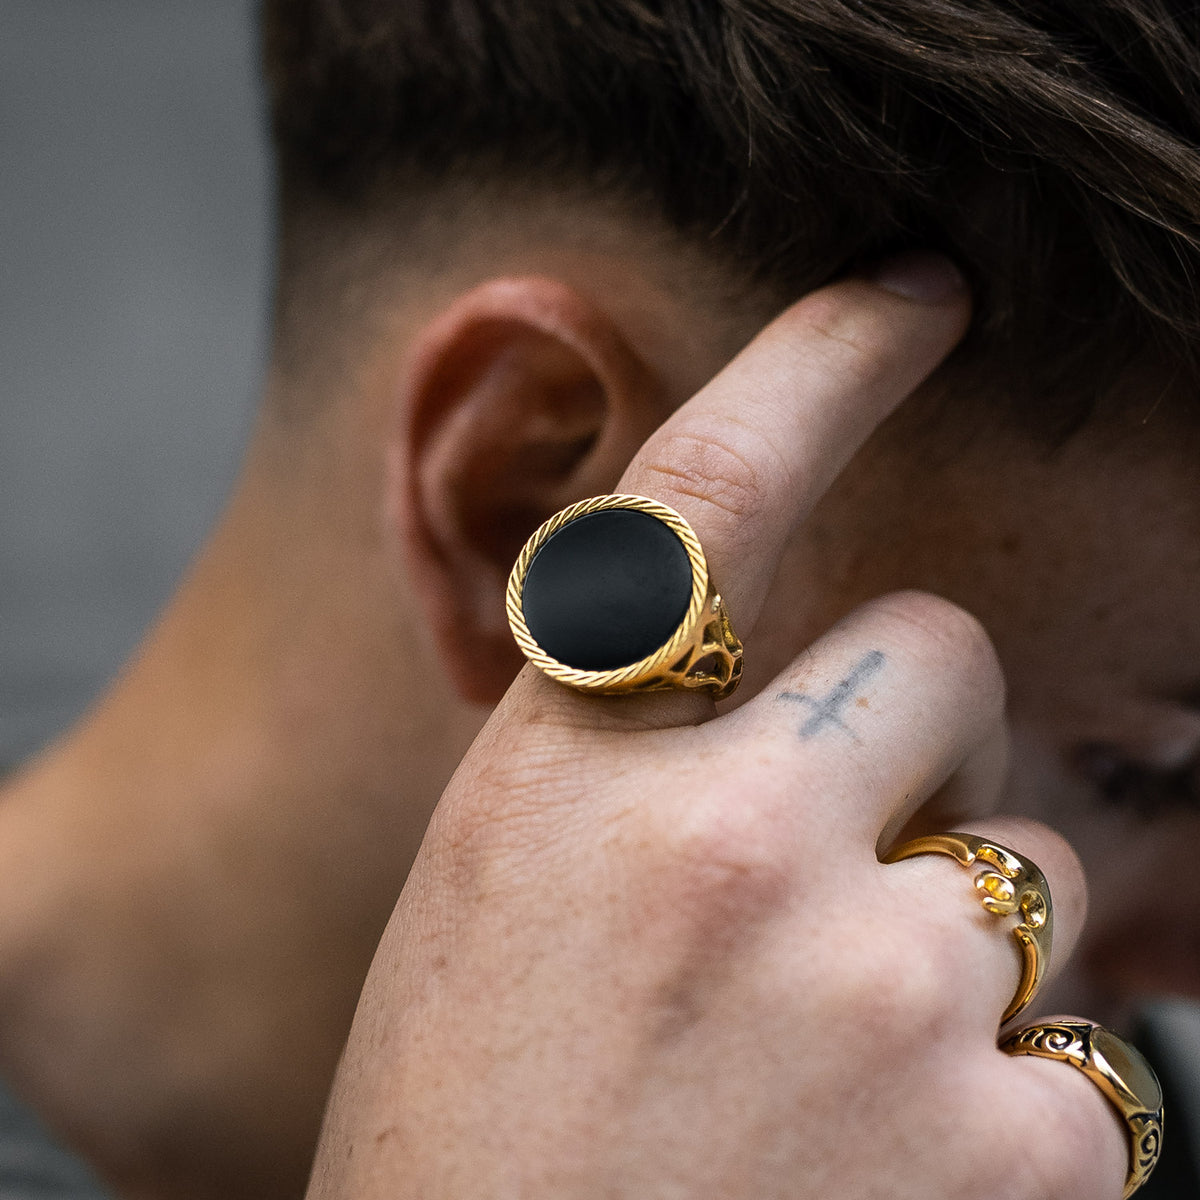 Circular signet ring in gold with onyx stone for men